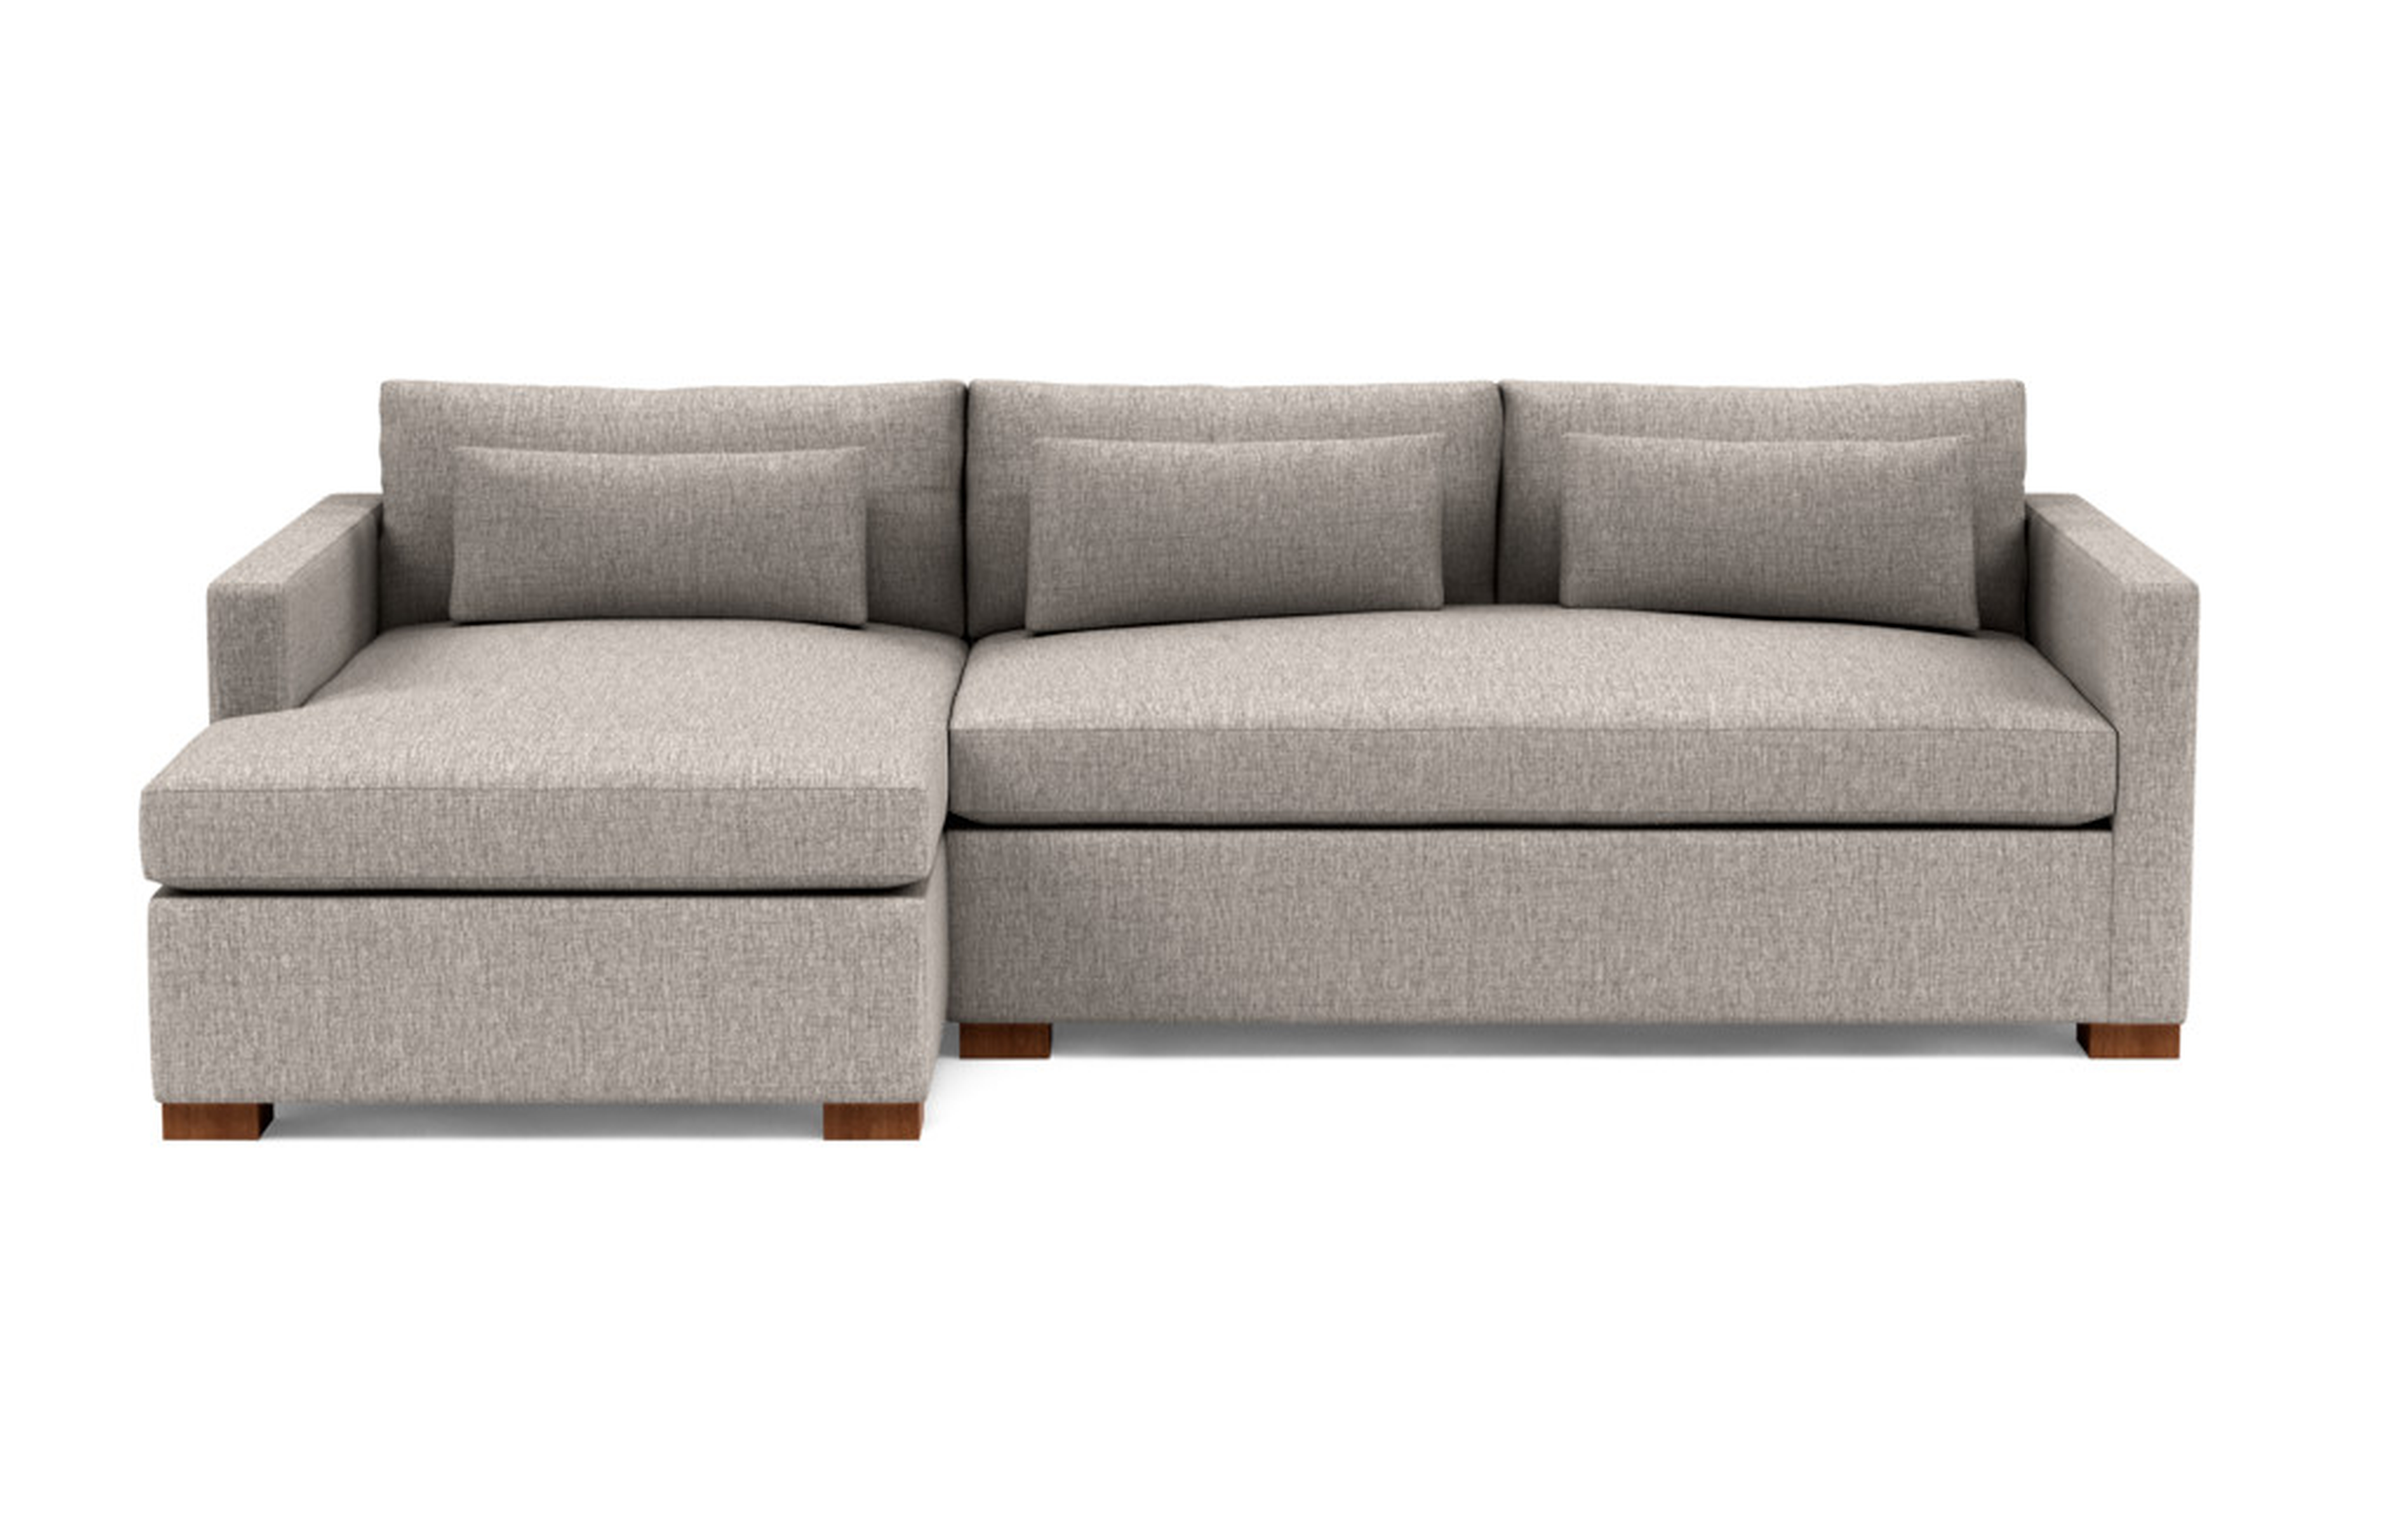 Charly 110" Left Sectional with Brown Earth Fabric, double down blend cushions, extended chaise, and Oiled Walnut legs - Interior Define